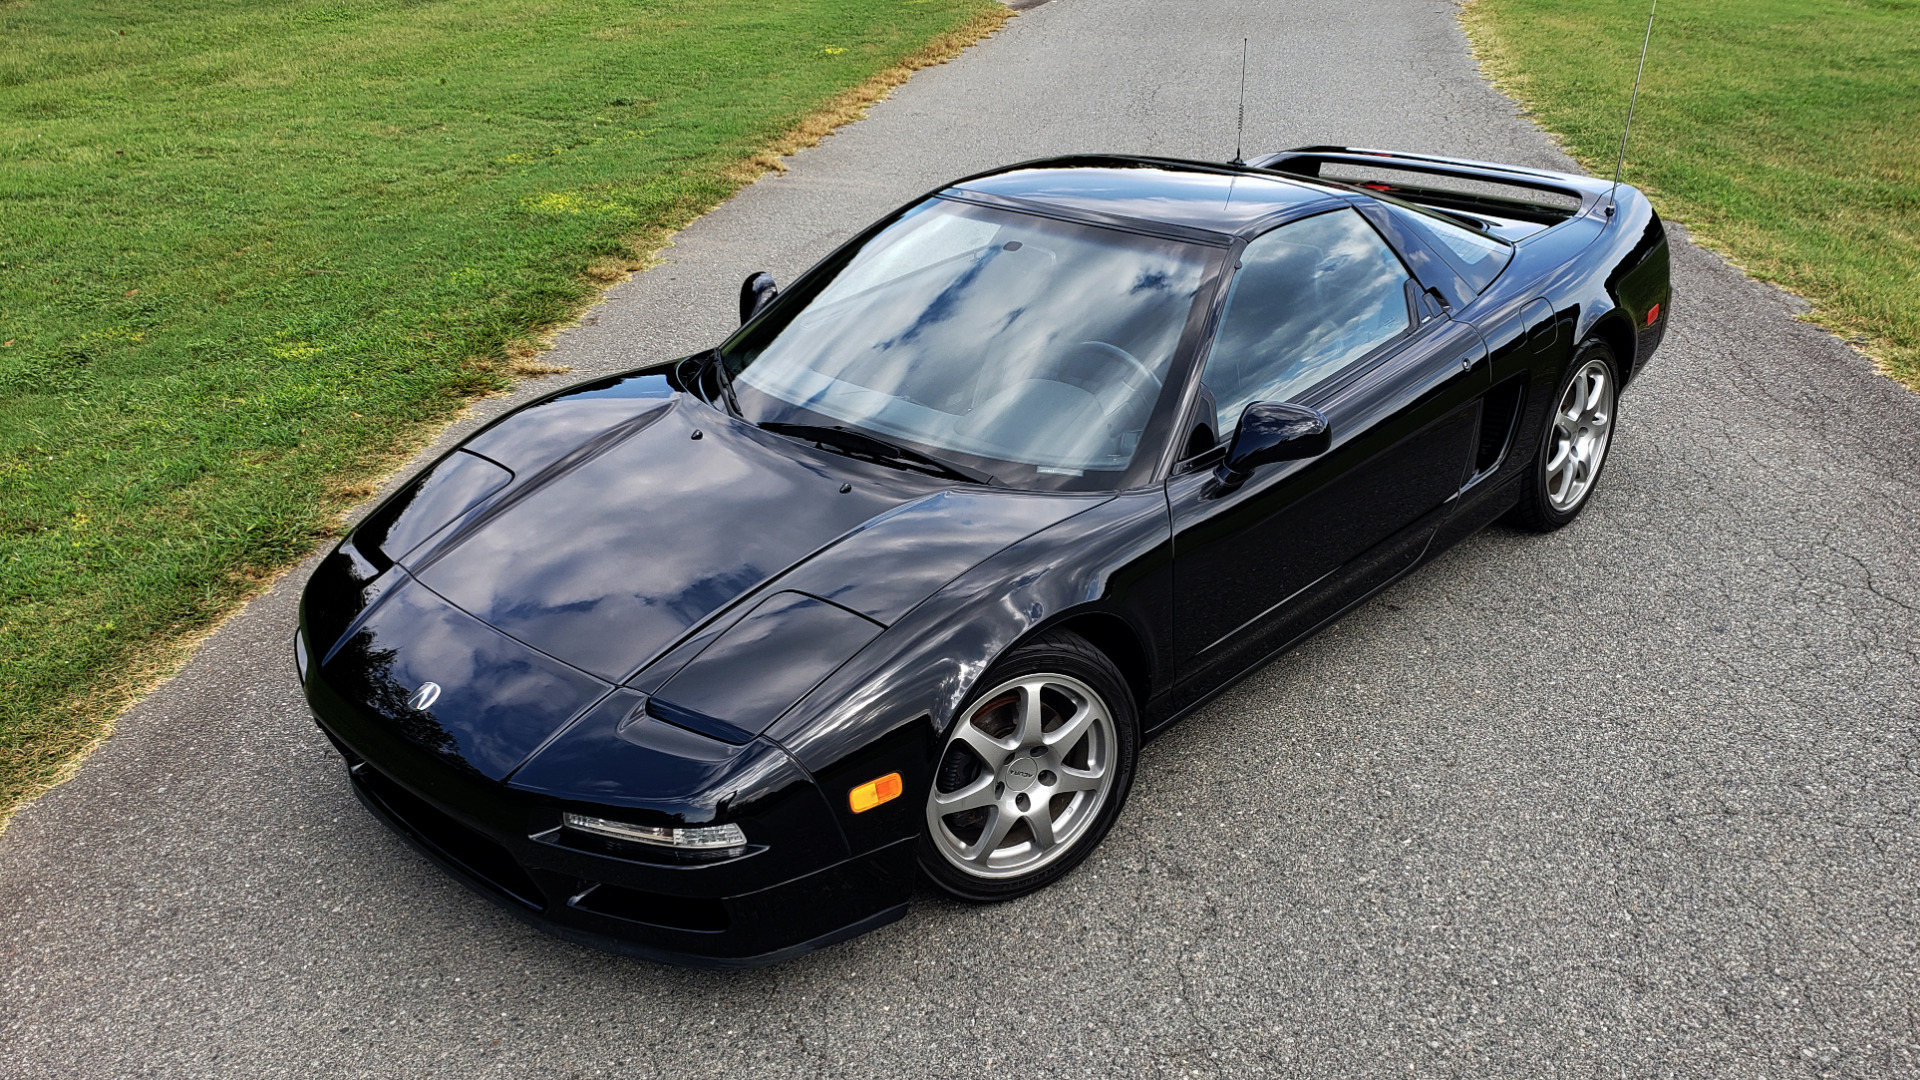 Used 1995 Acura NSX OPEN TOP / 5-SPD MAN / LOW MILES / SUPER CLEAN for sale Sold at Formula Imports in Charlotte NC 28227 3